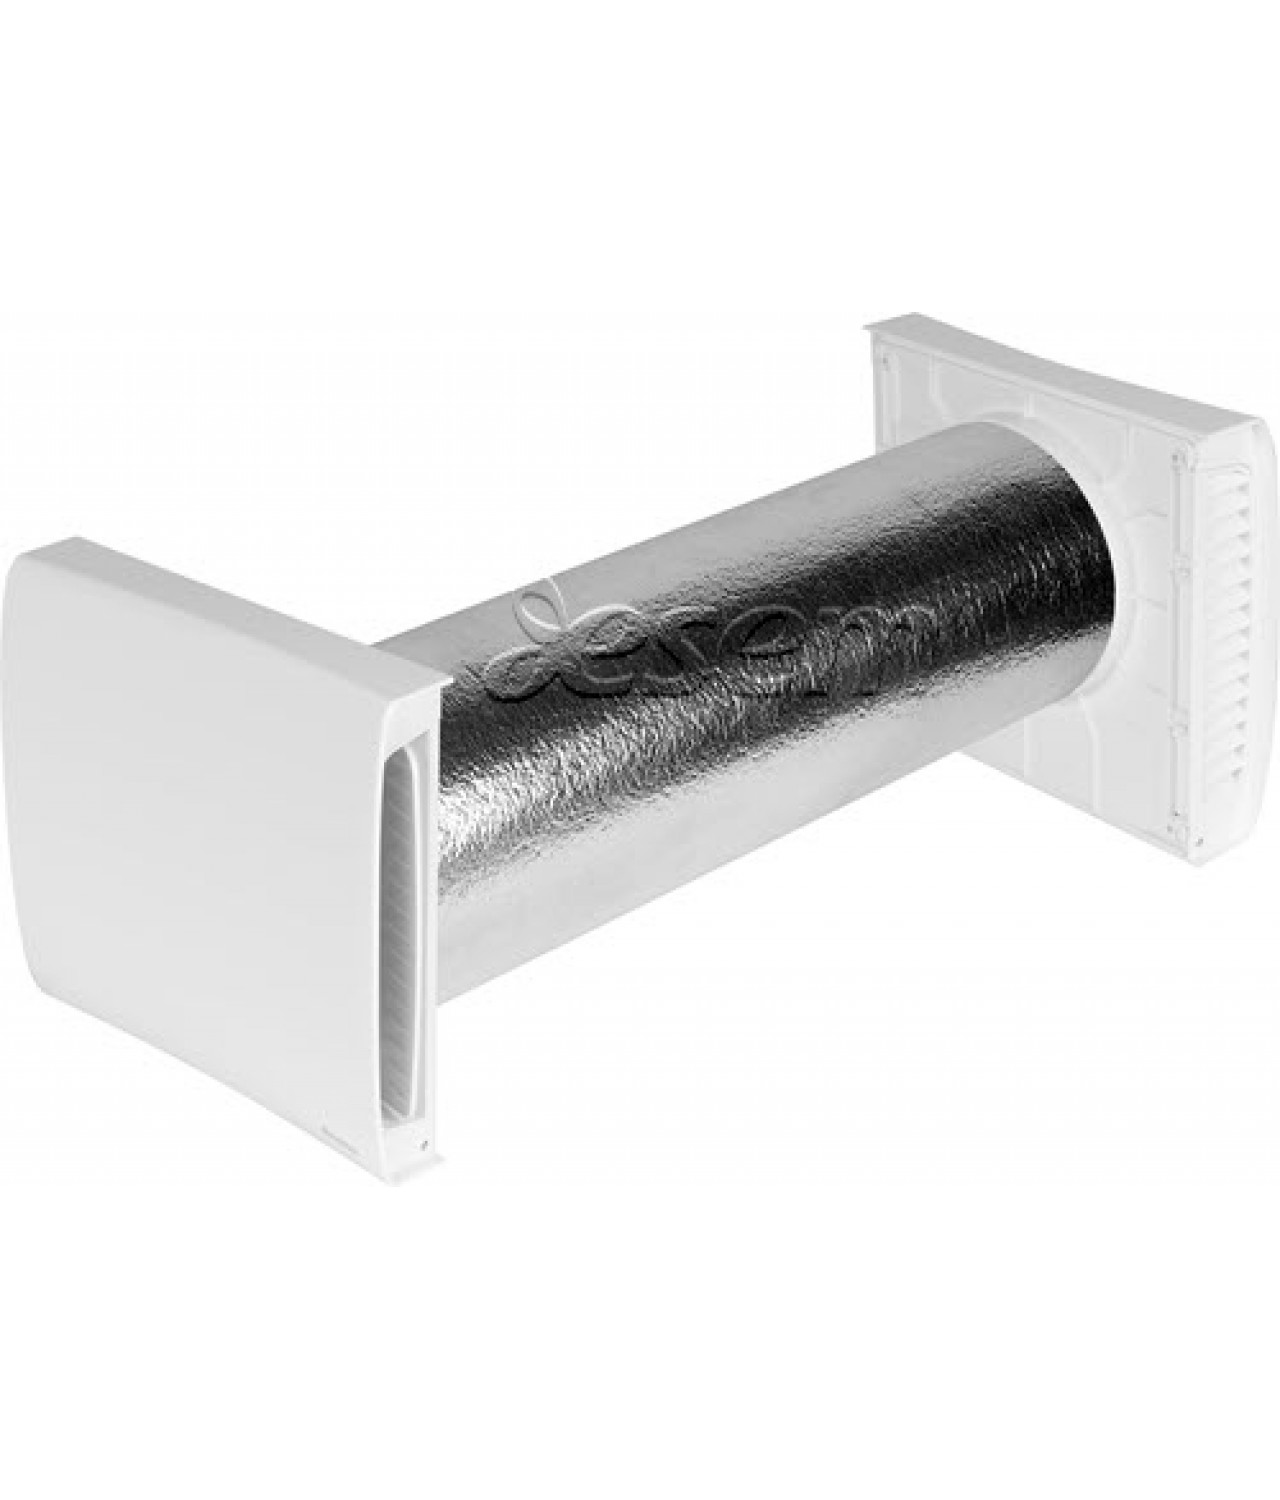 Silent AHR160 insulated duct